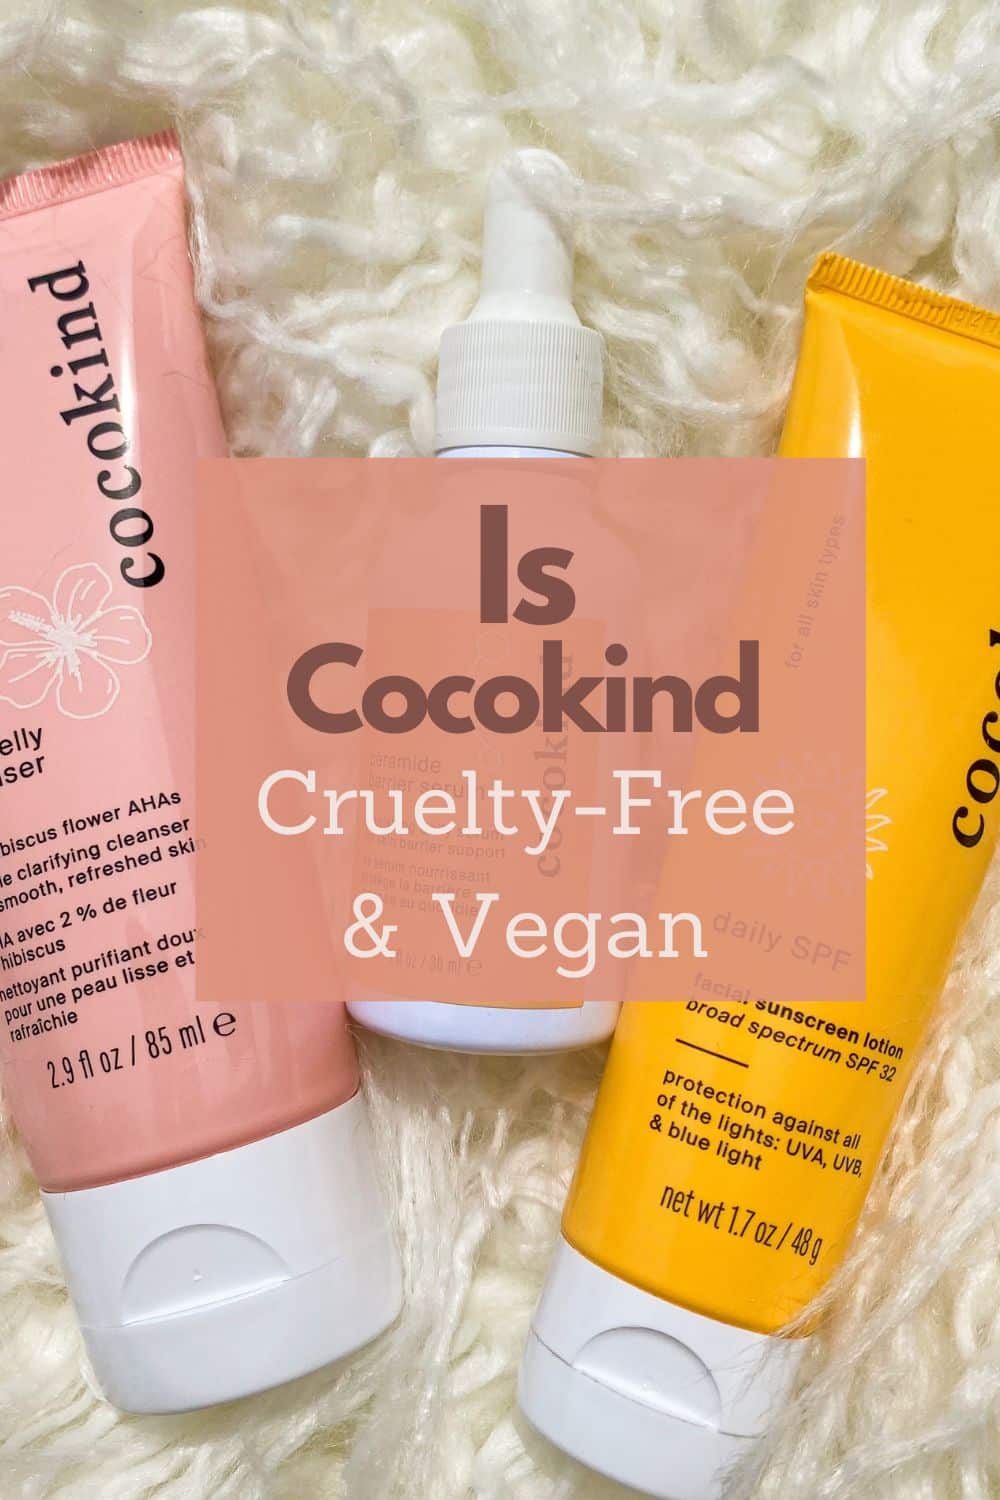 Cocokind Vegan Product List (Cruelty-Free)